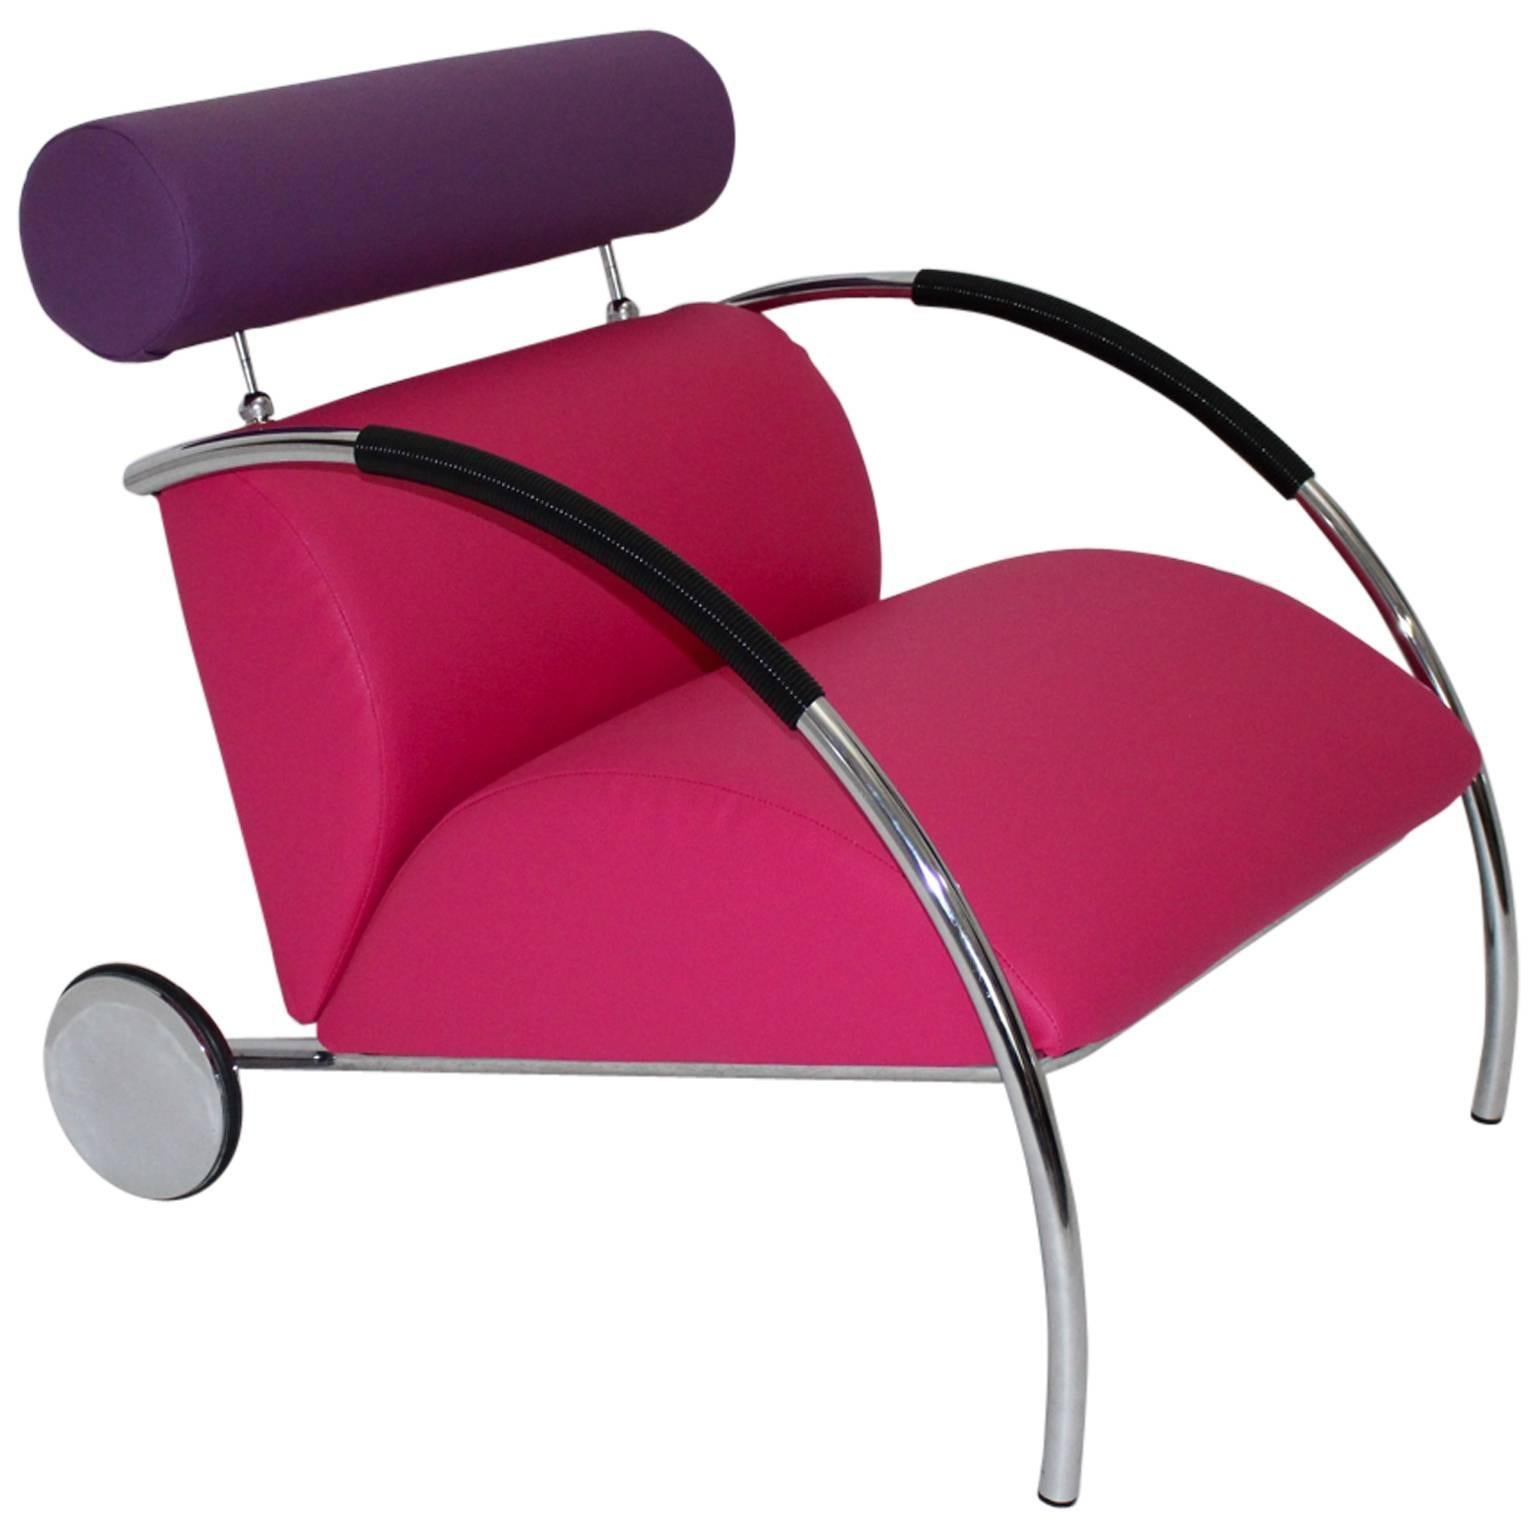 Pop Art Pink Lilac Vintage Armchair Zyklus Chair Peter Maly, 1980s Germany For Sale